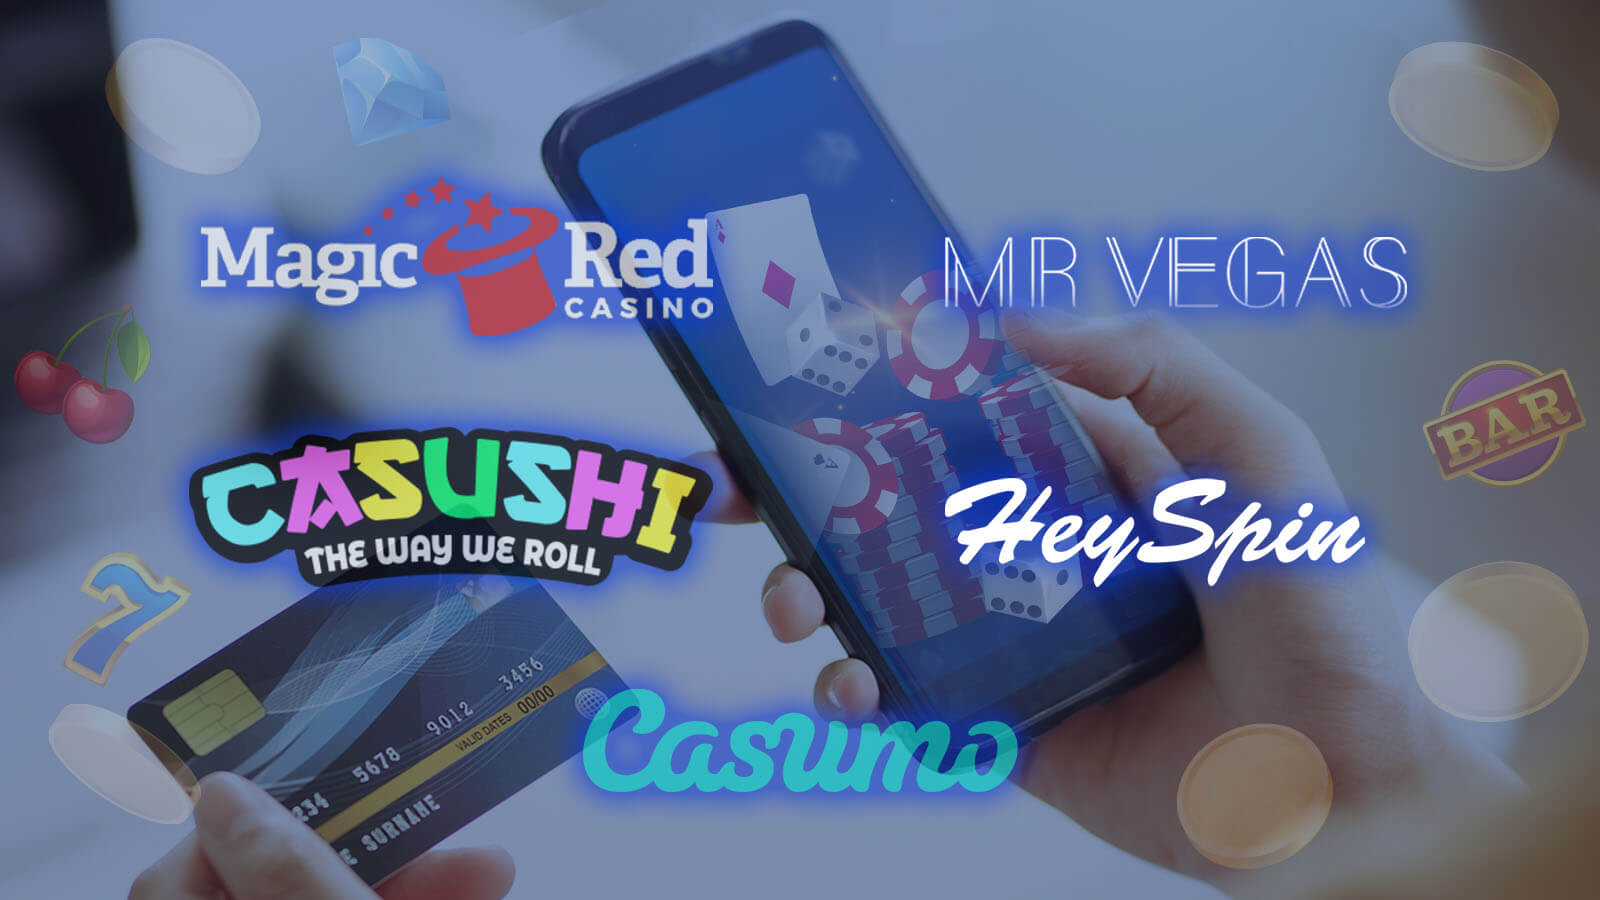 Top 5 Fast Payout Casinos for Debit Cards